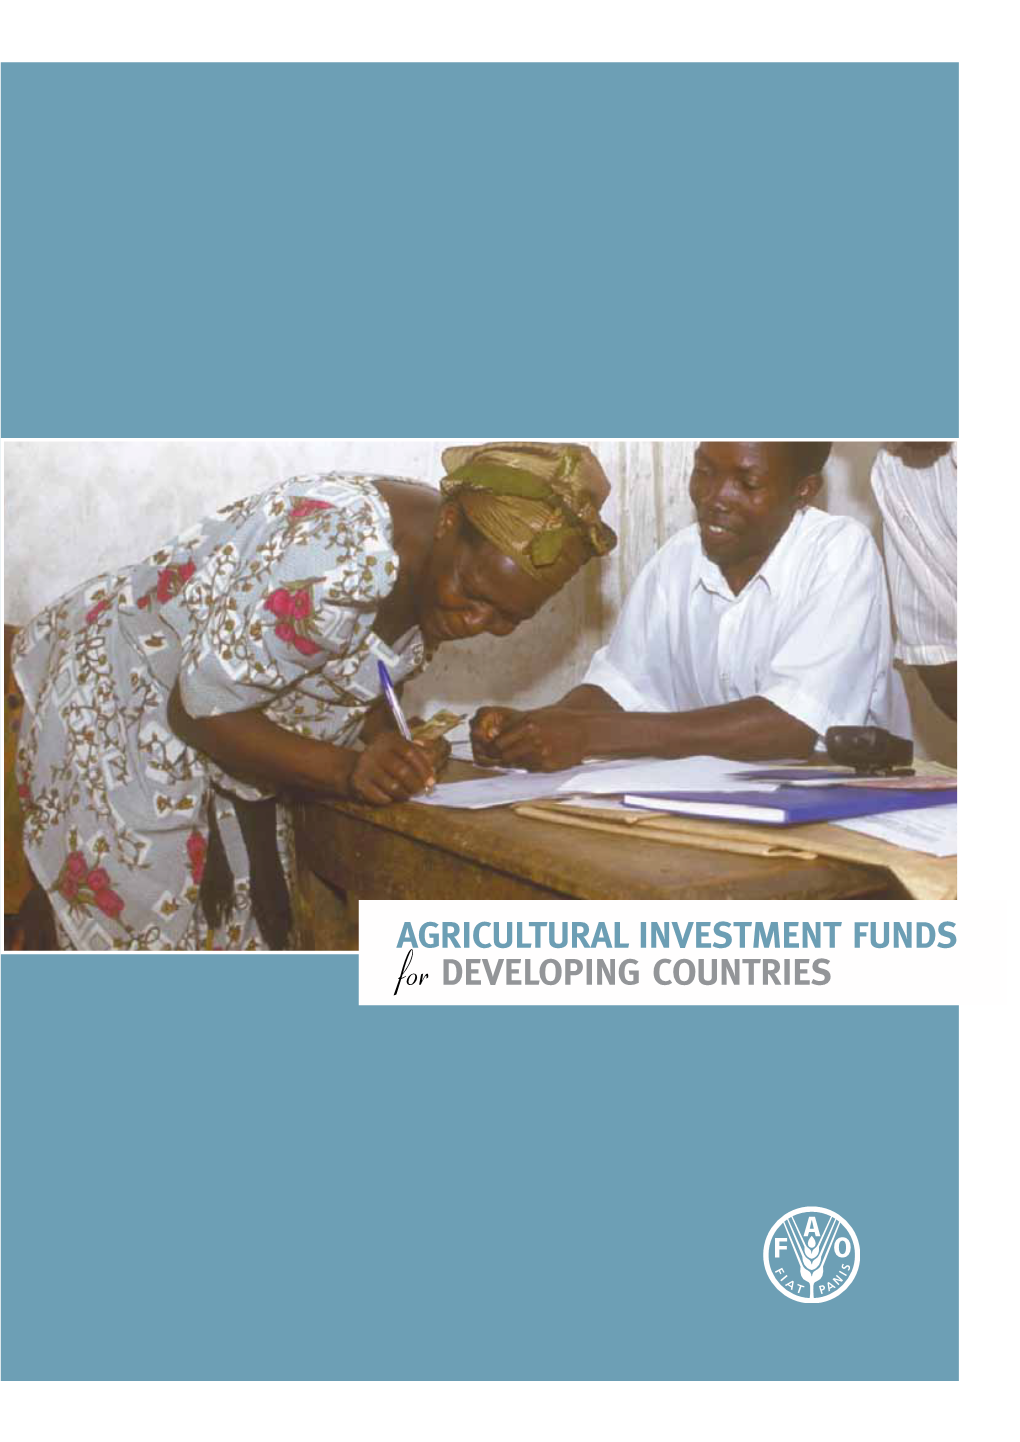 AGRICULTURAL INVESTMENT FUNDS for DEVELOPING COUNTRIES AGRICULTURAL INVESTMENT FUNDS for DEVELOPING COUNTRIES